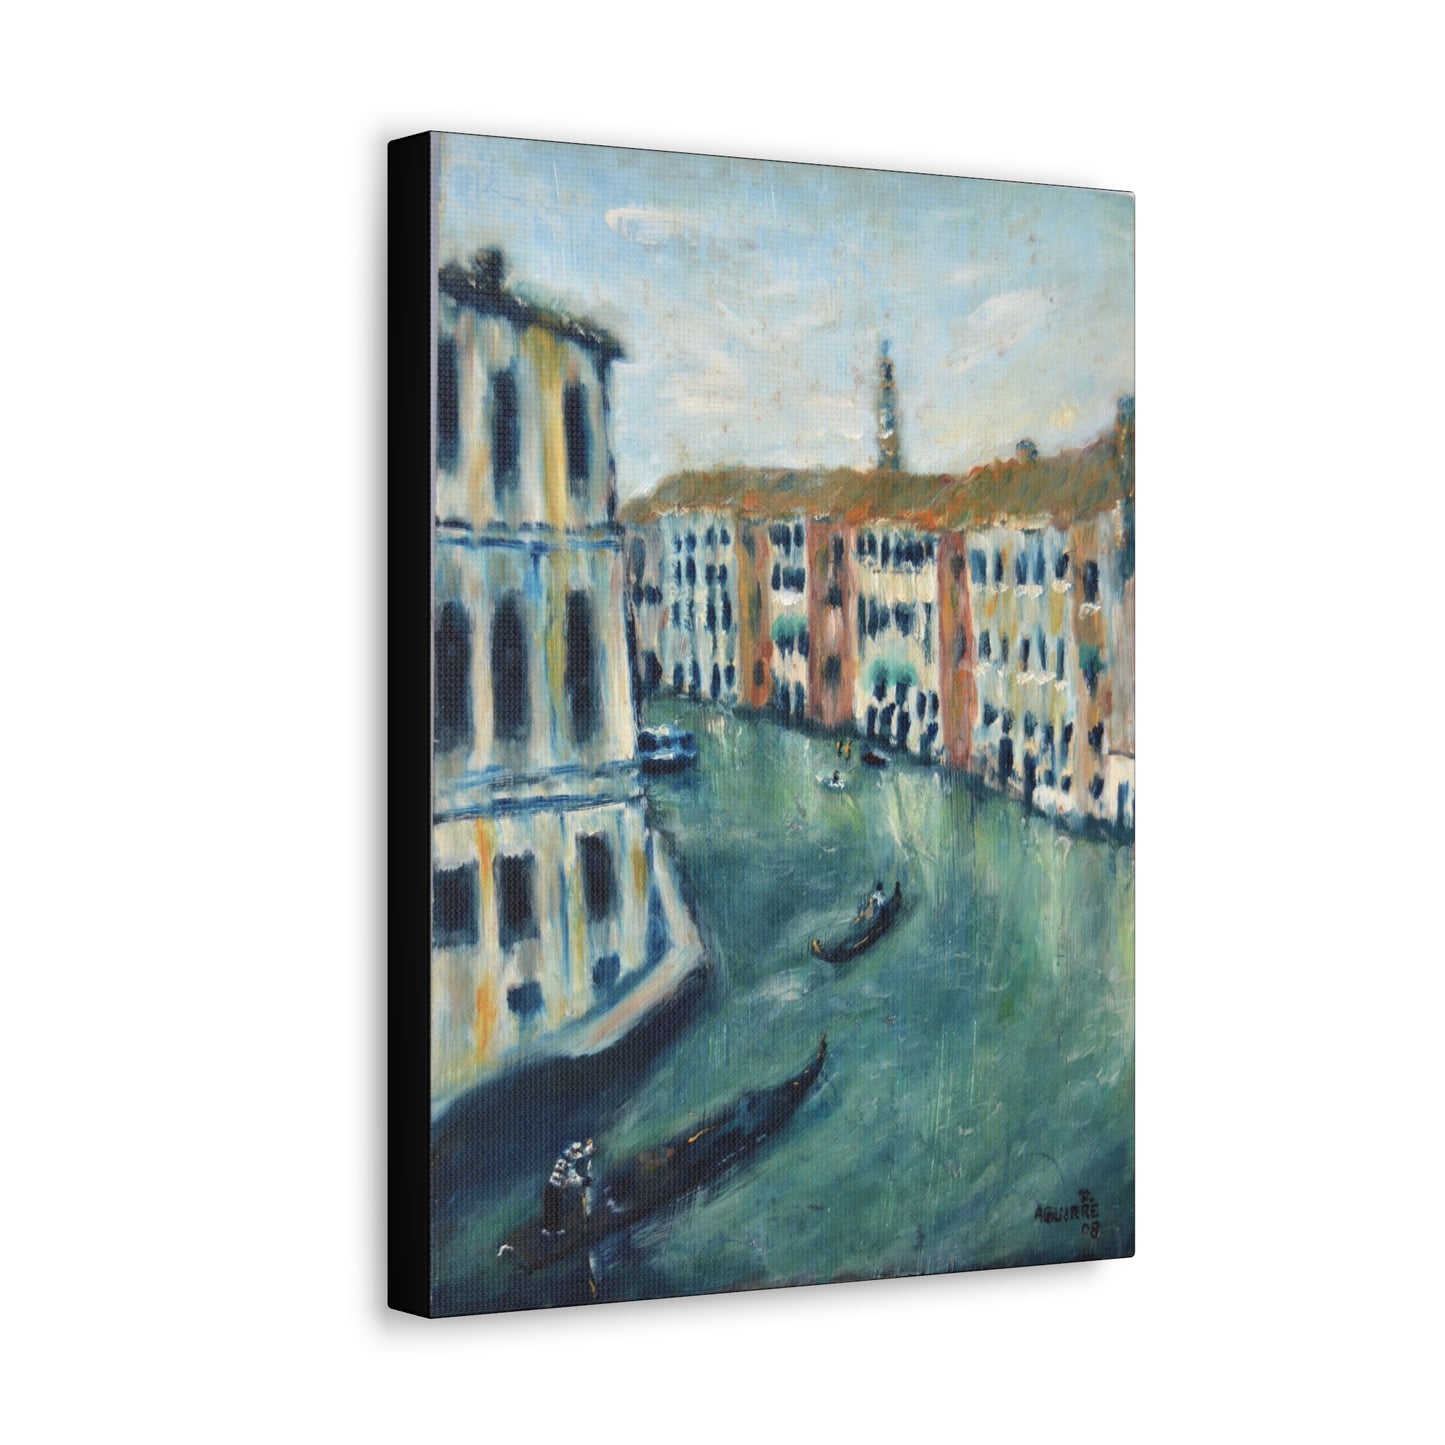 Venice Waterway painting  - Print on Canvas Gallery Wraps